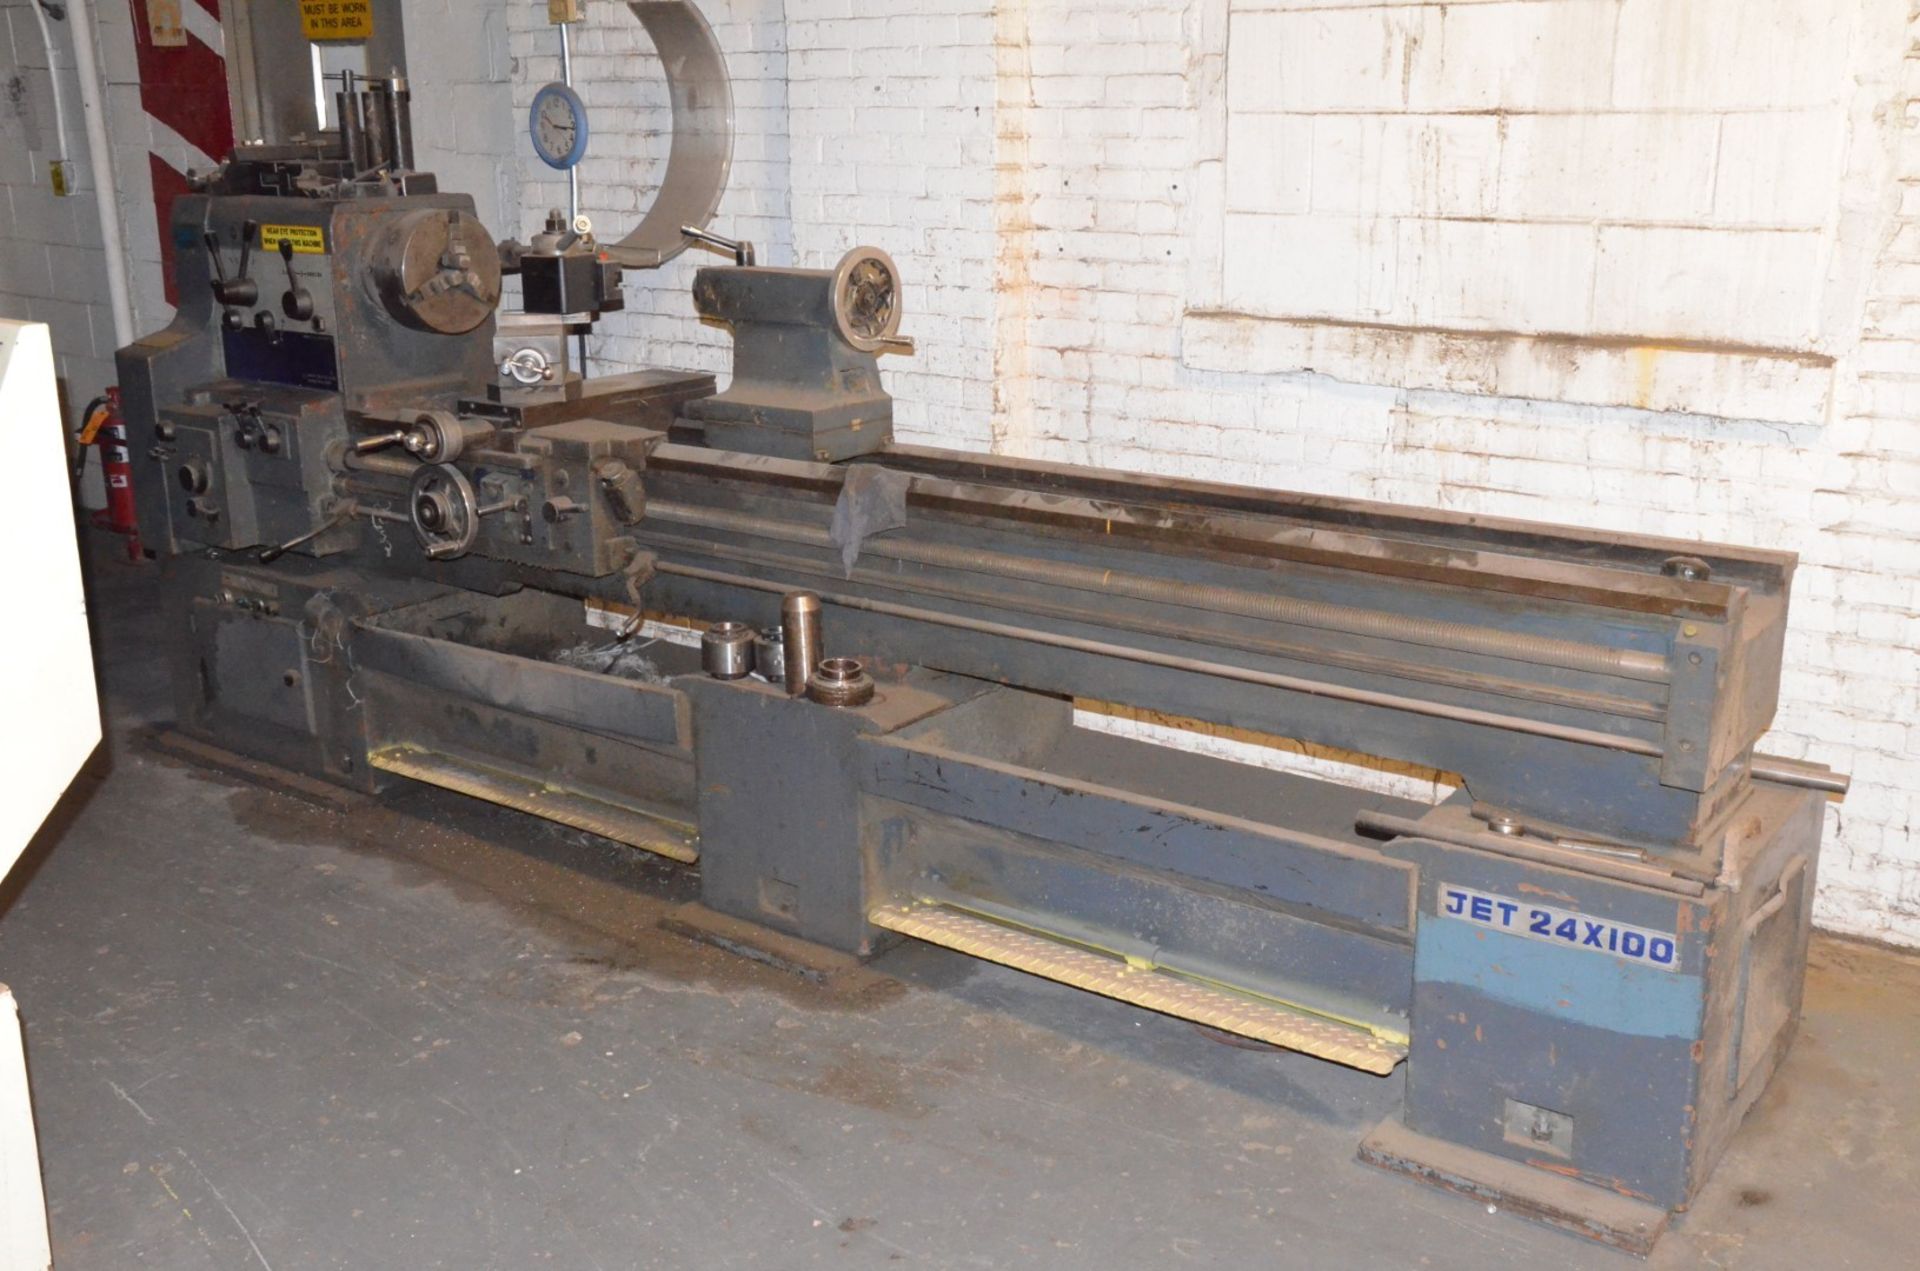 JET JE24X100 GAP BED ENGINE LATHE WITH 24" SWING OVER BED, 33" SWING IN THE GAP, 100" BETWEEN - Image 2 of 12